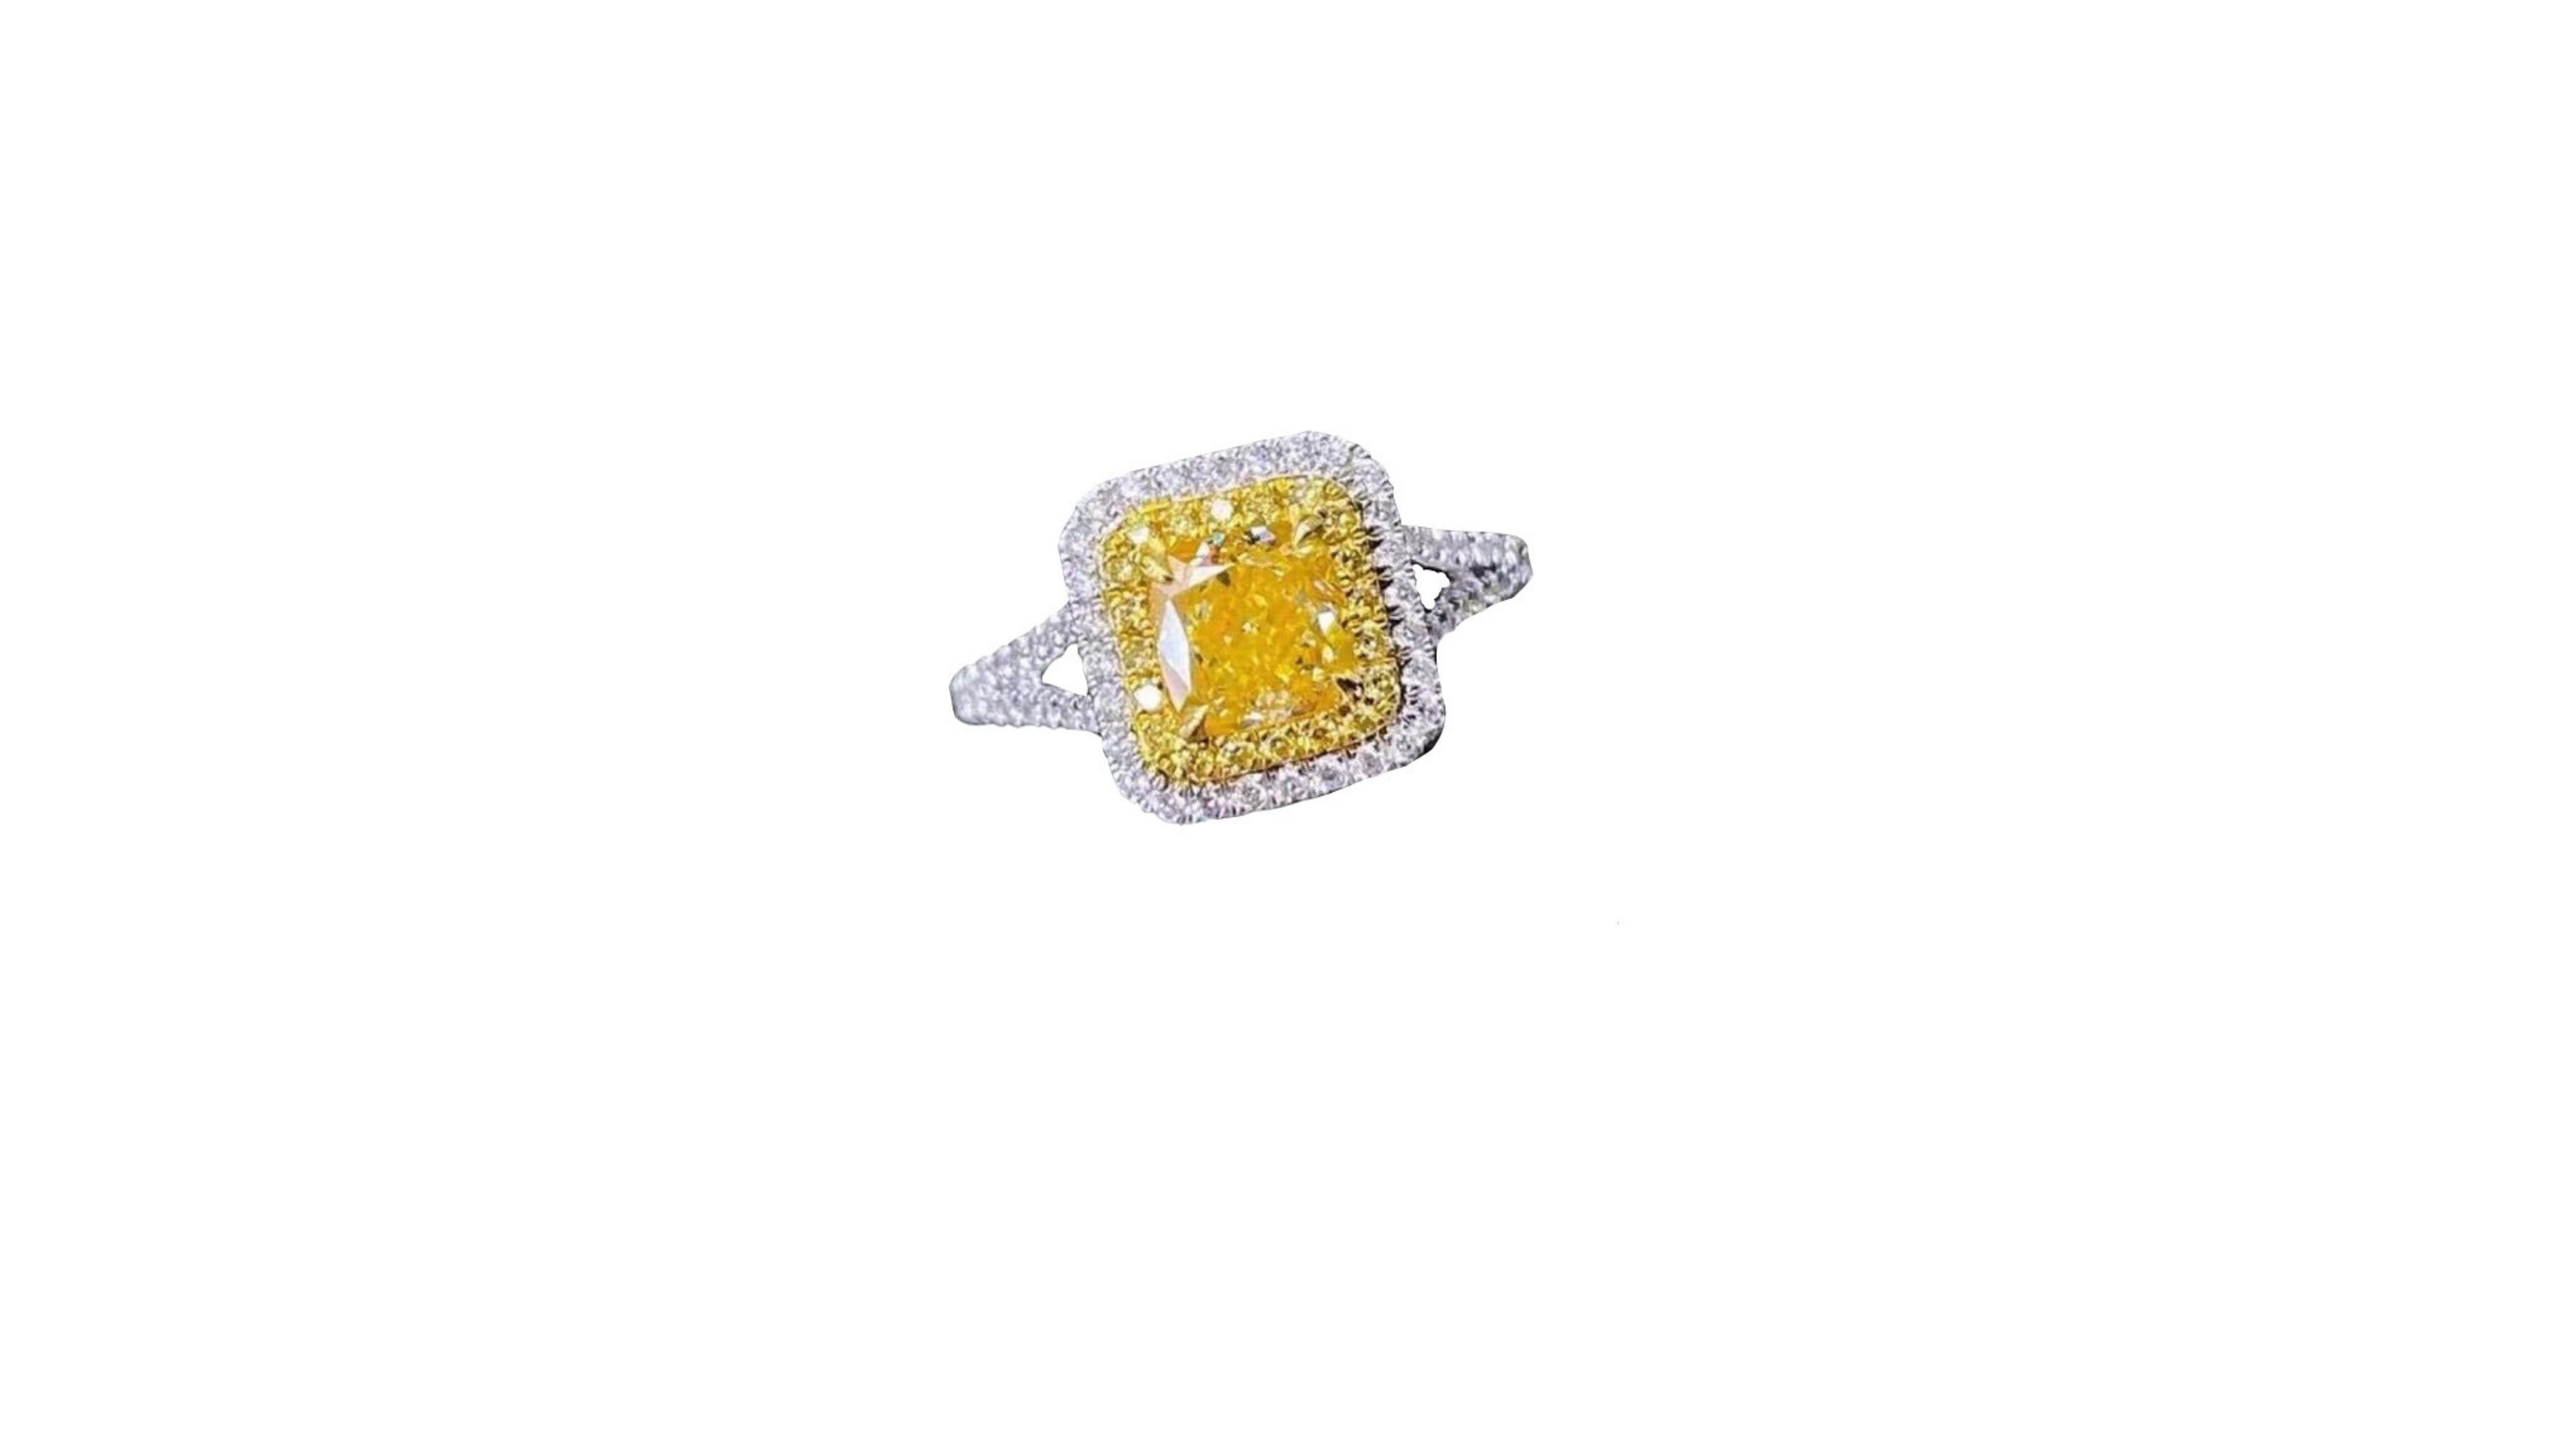 This is a rare 1 Carat Yellow Diamond Ring  with 132 diamonds  set in 18 karat white gold and stands out in this cushion cut. .  You can have  one custom made too if you have are looking for specific ie a different carat etc

Do let us know your